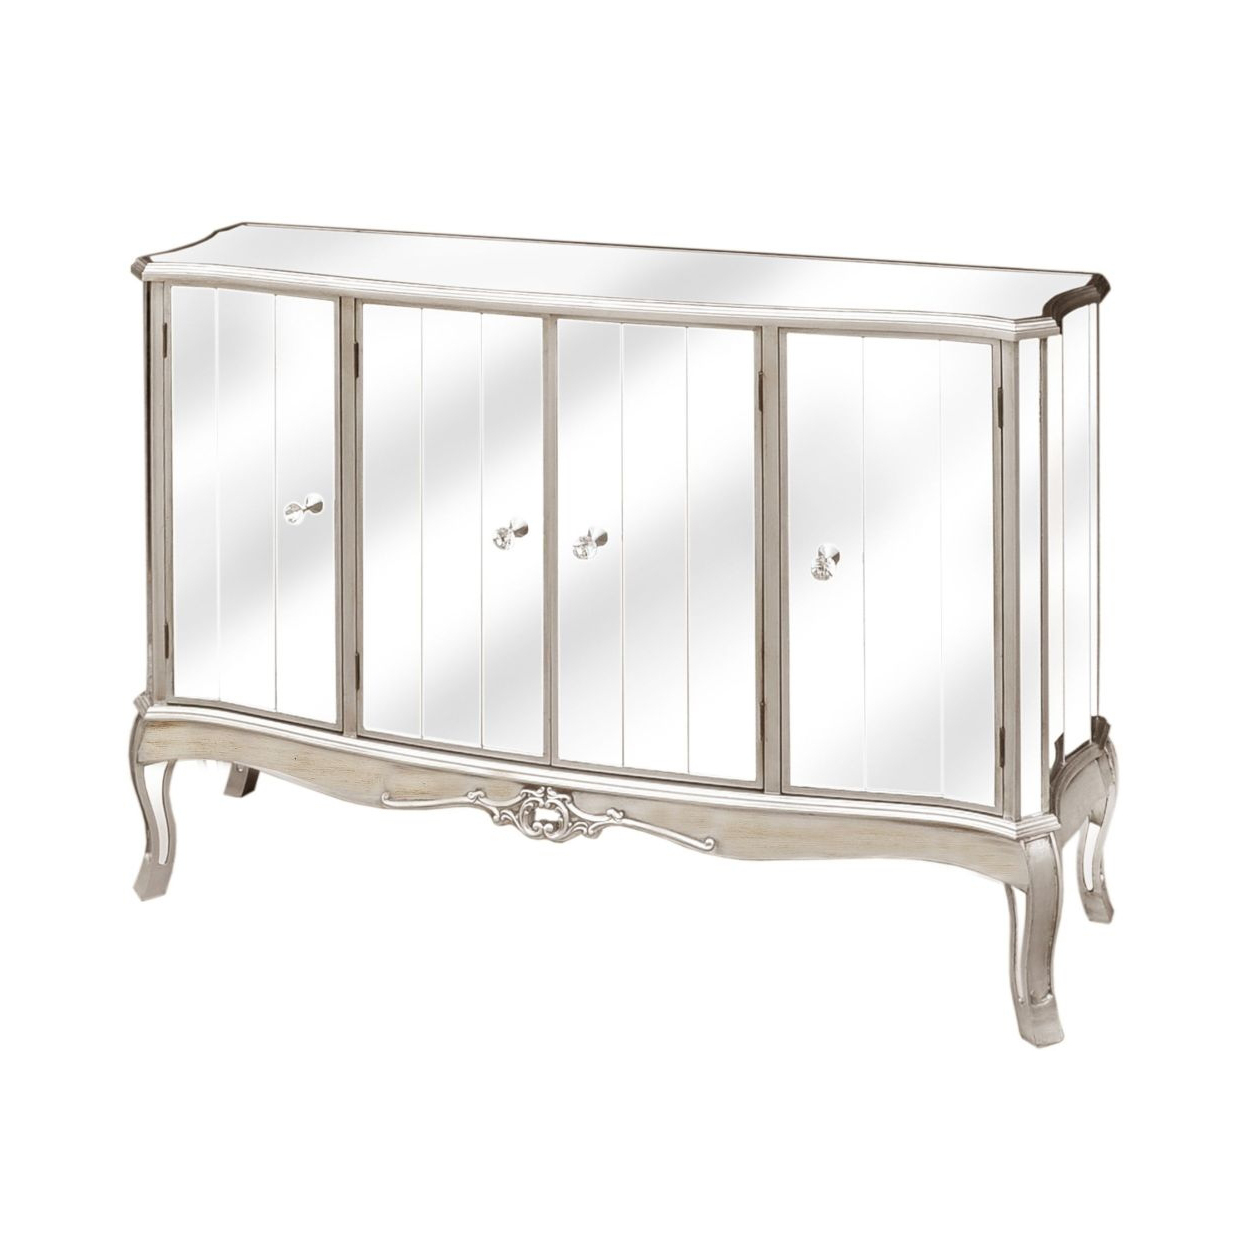 Bedroom furniture silver glass mirrored console table